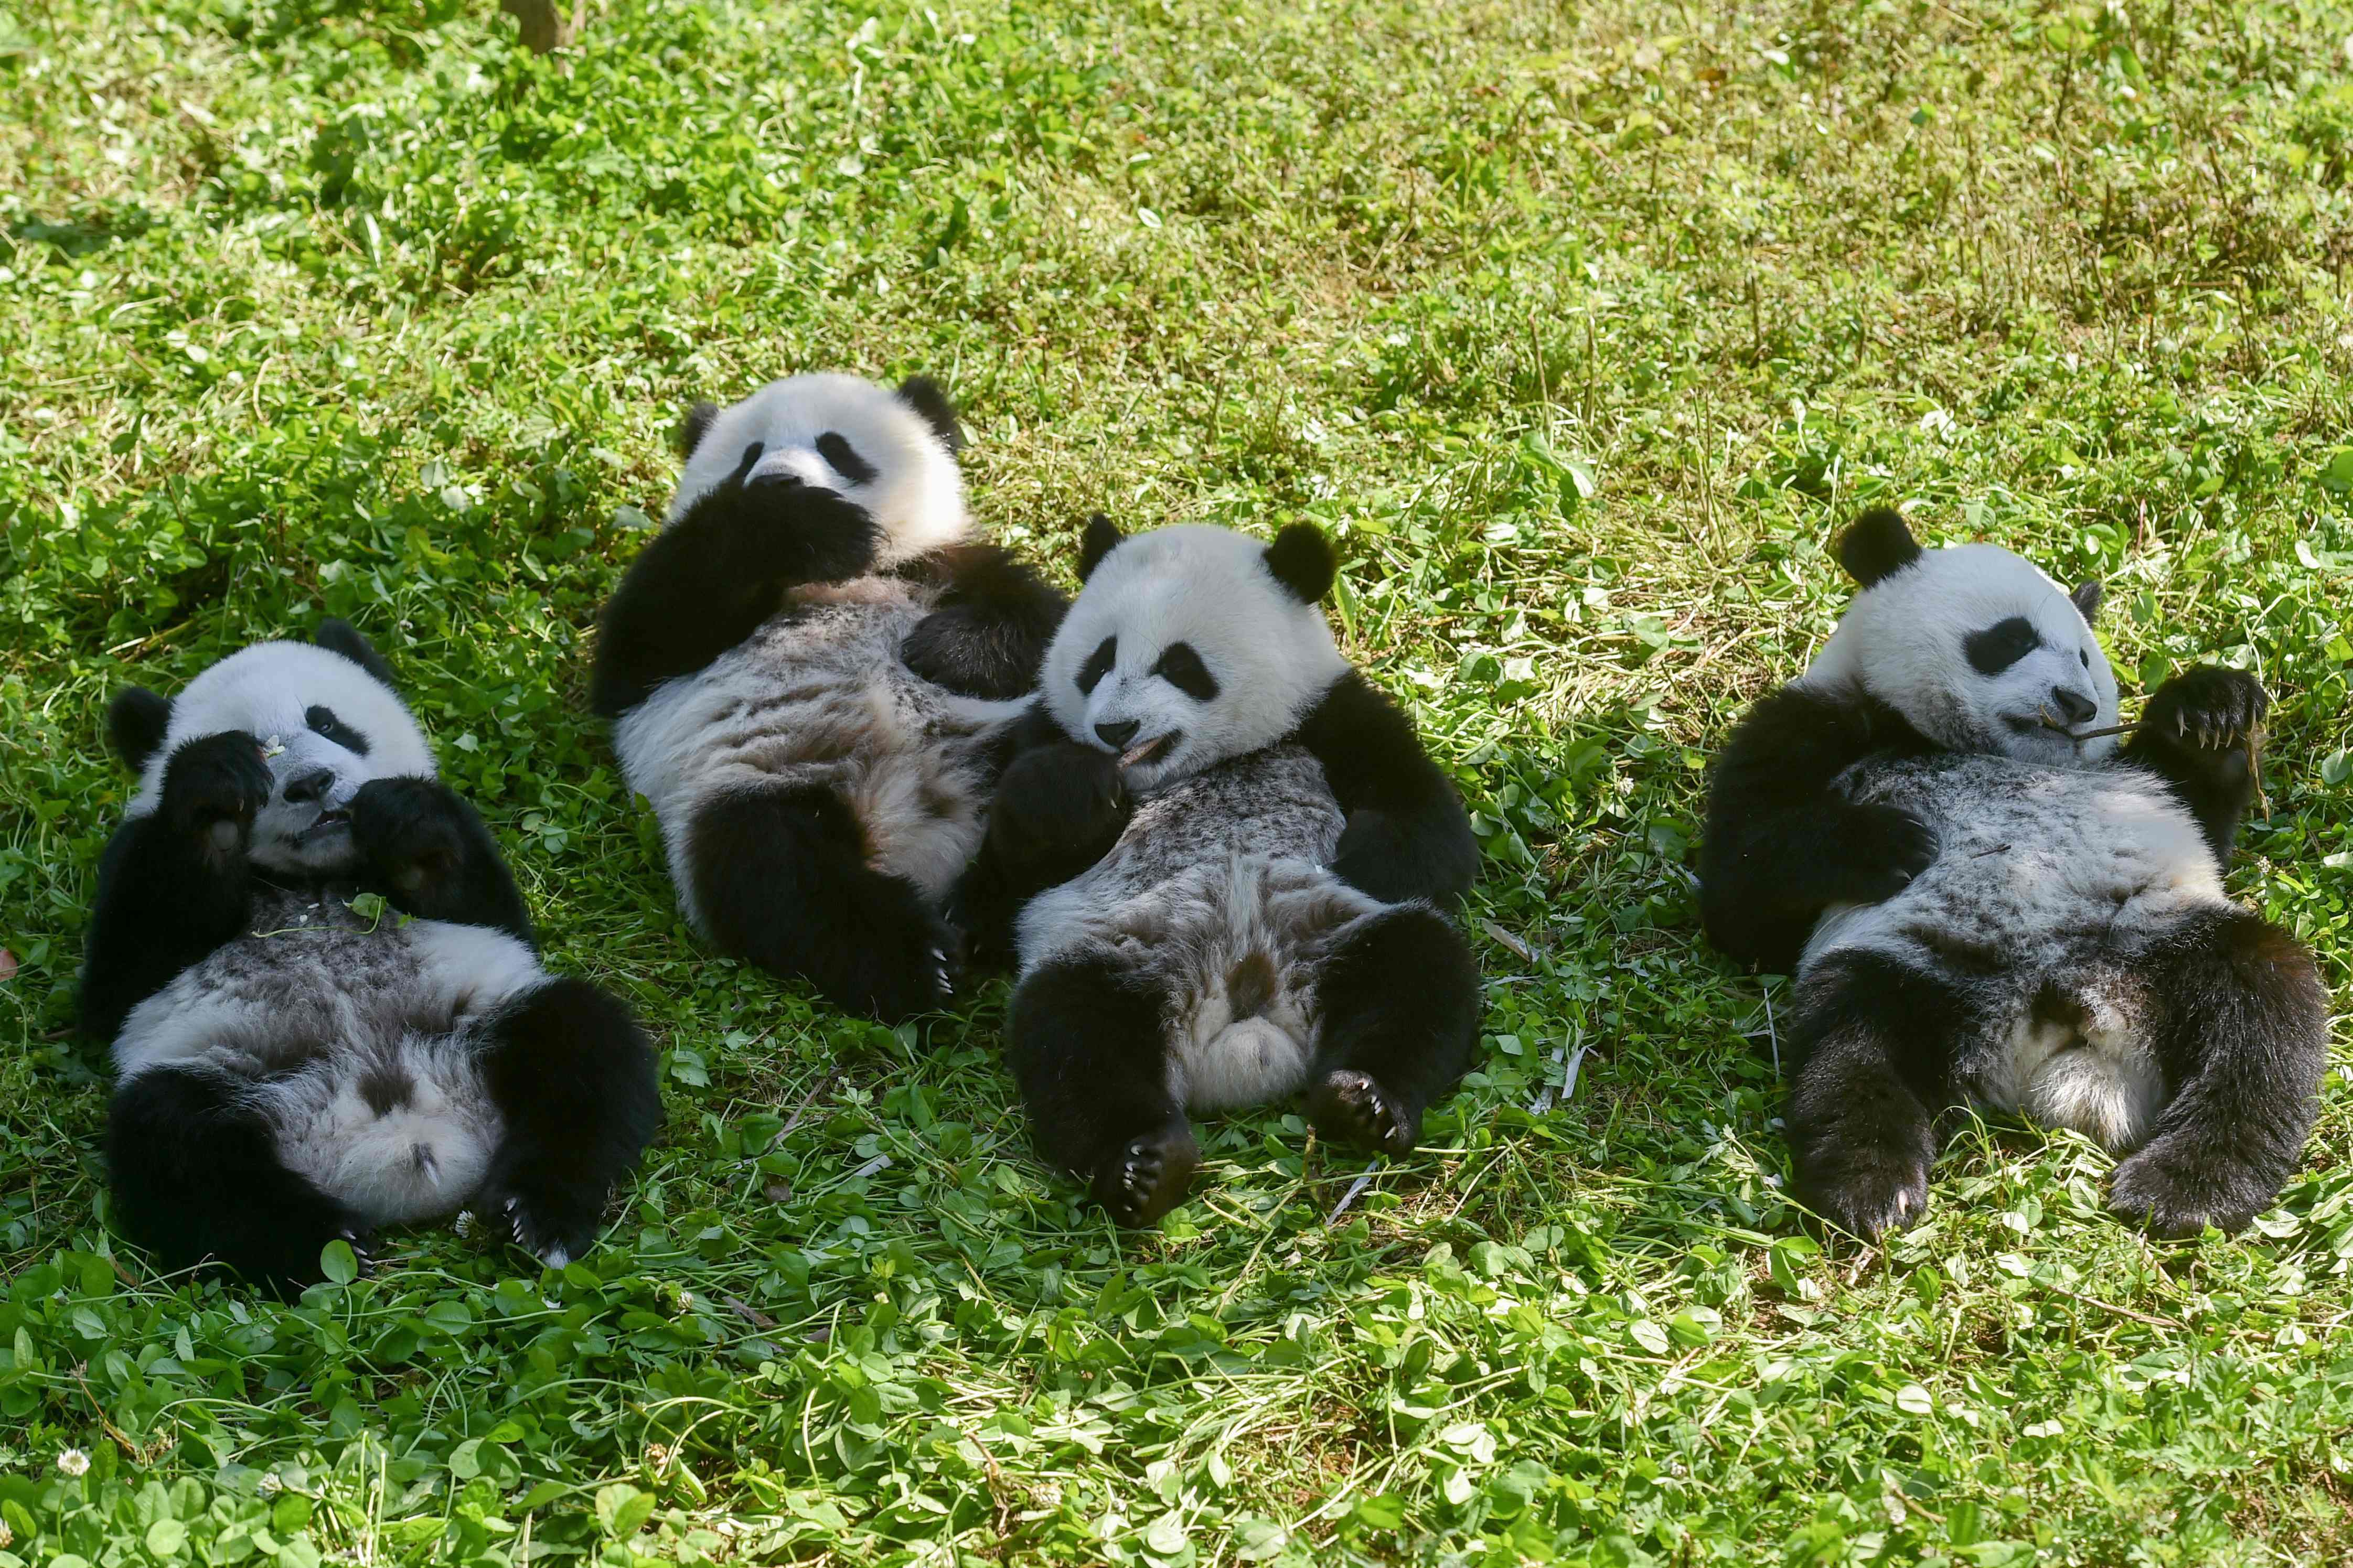 What is a group of pandas called?